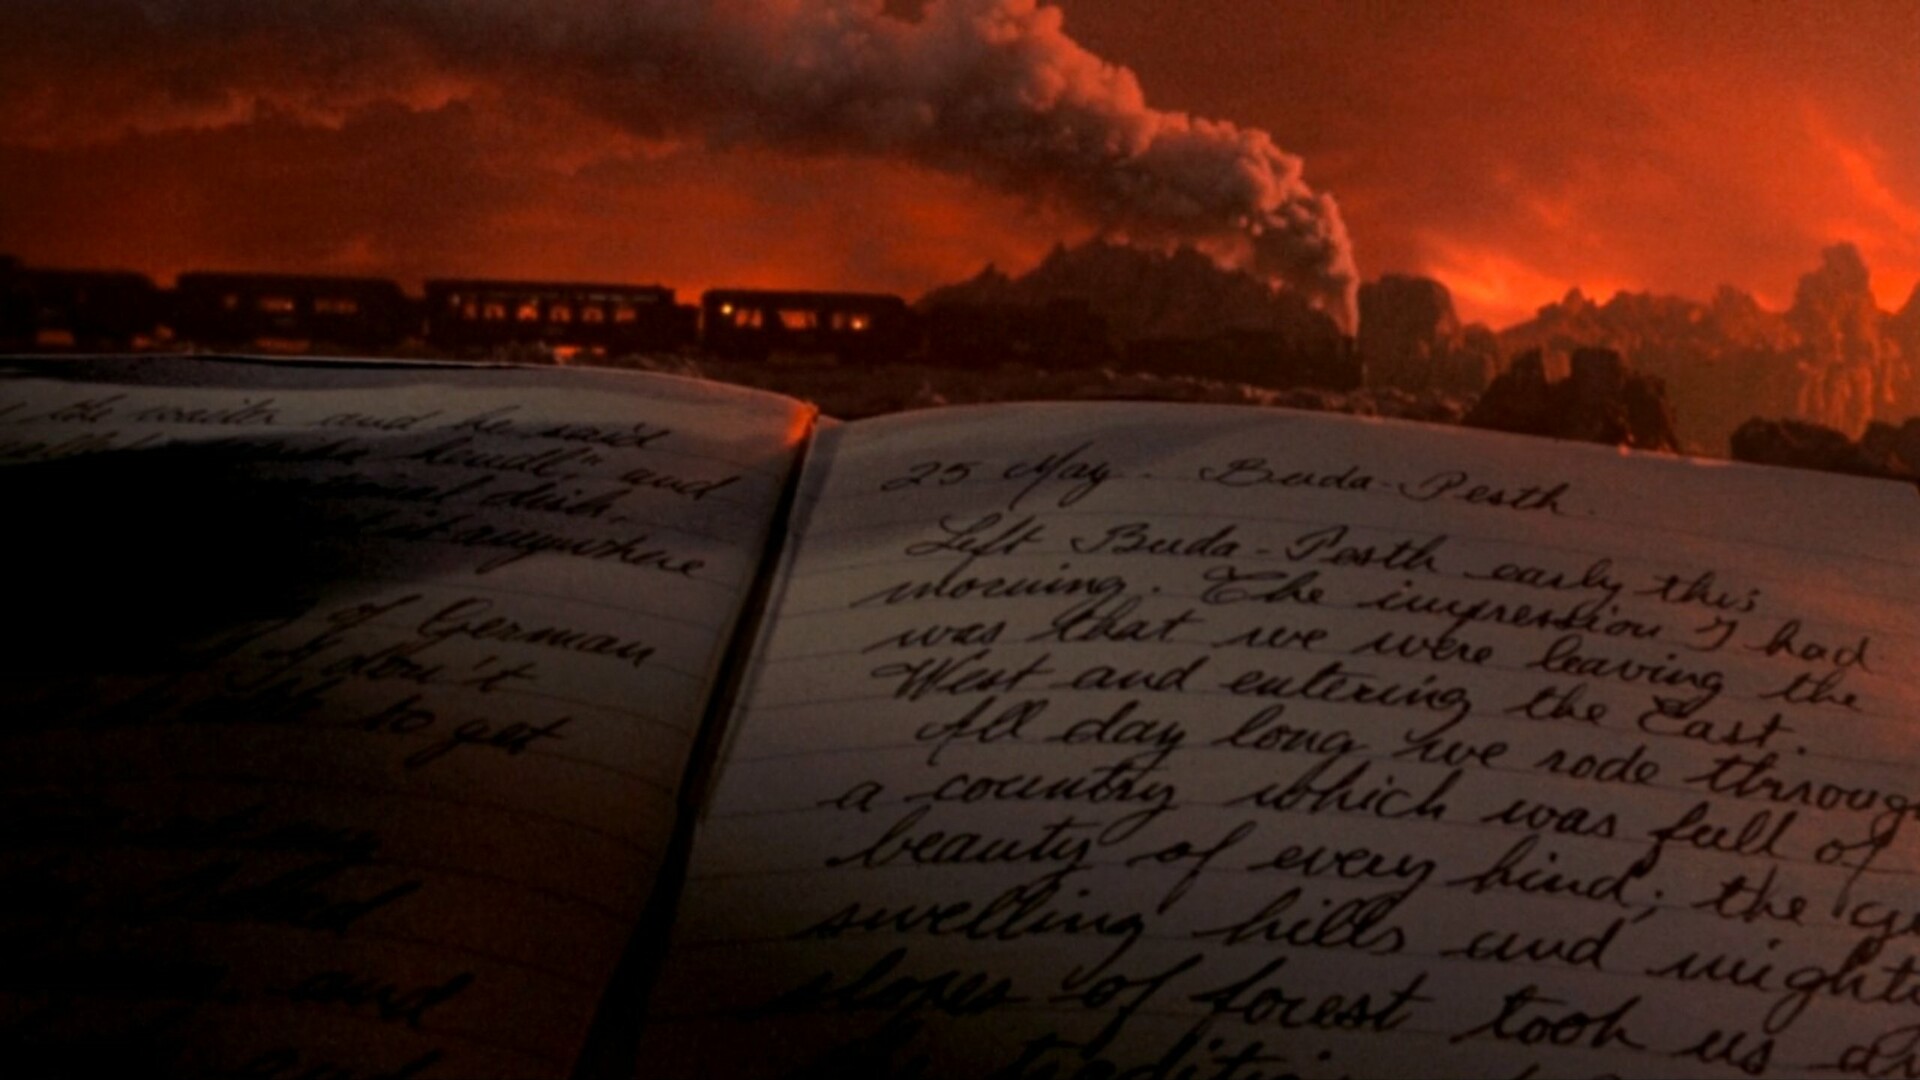 One of the process shots from Bram Stoker's dracula. It's a diary entry being written as a locomotive steams under a red sky.